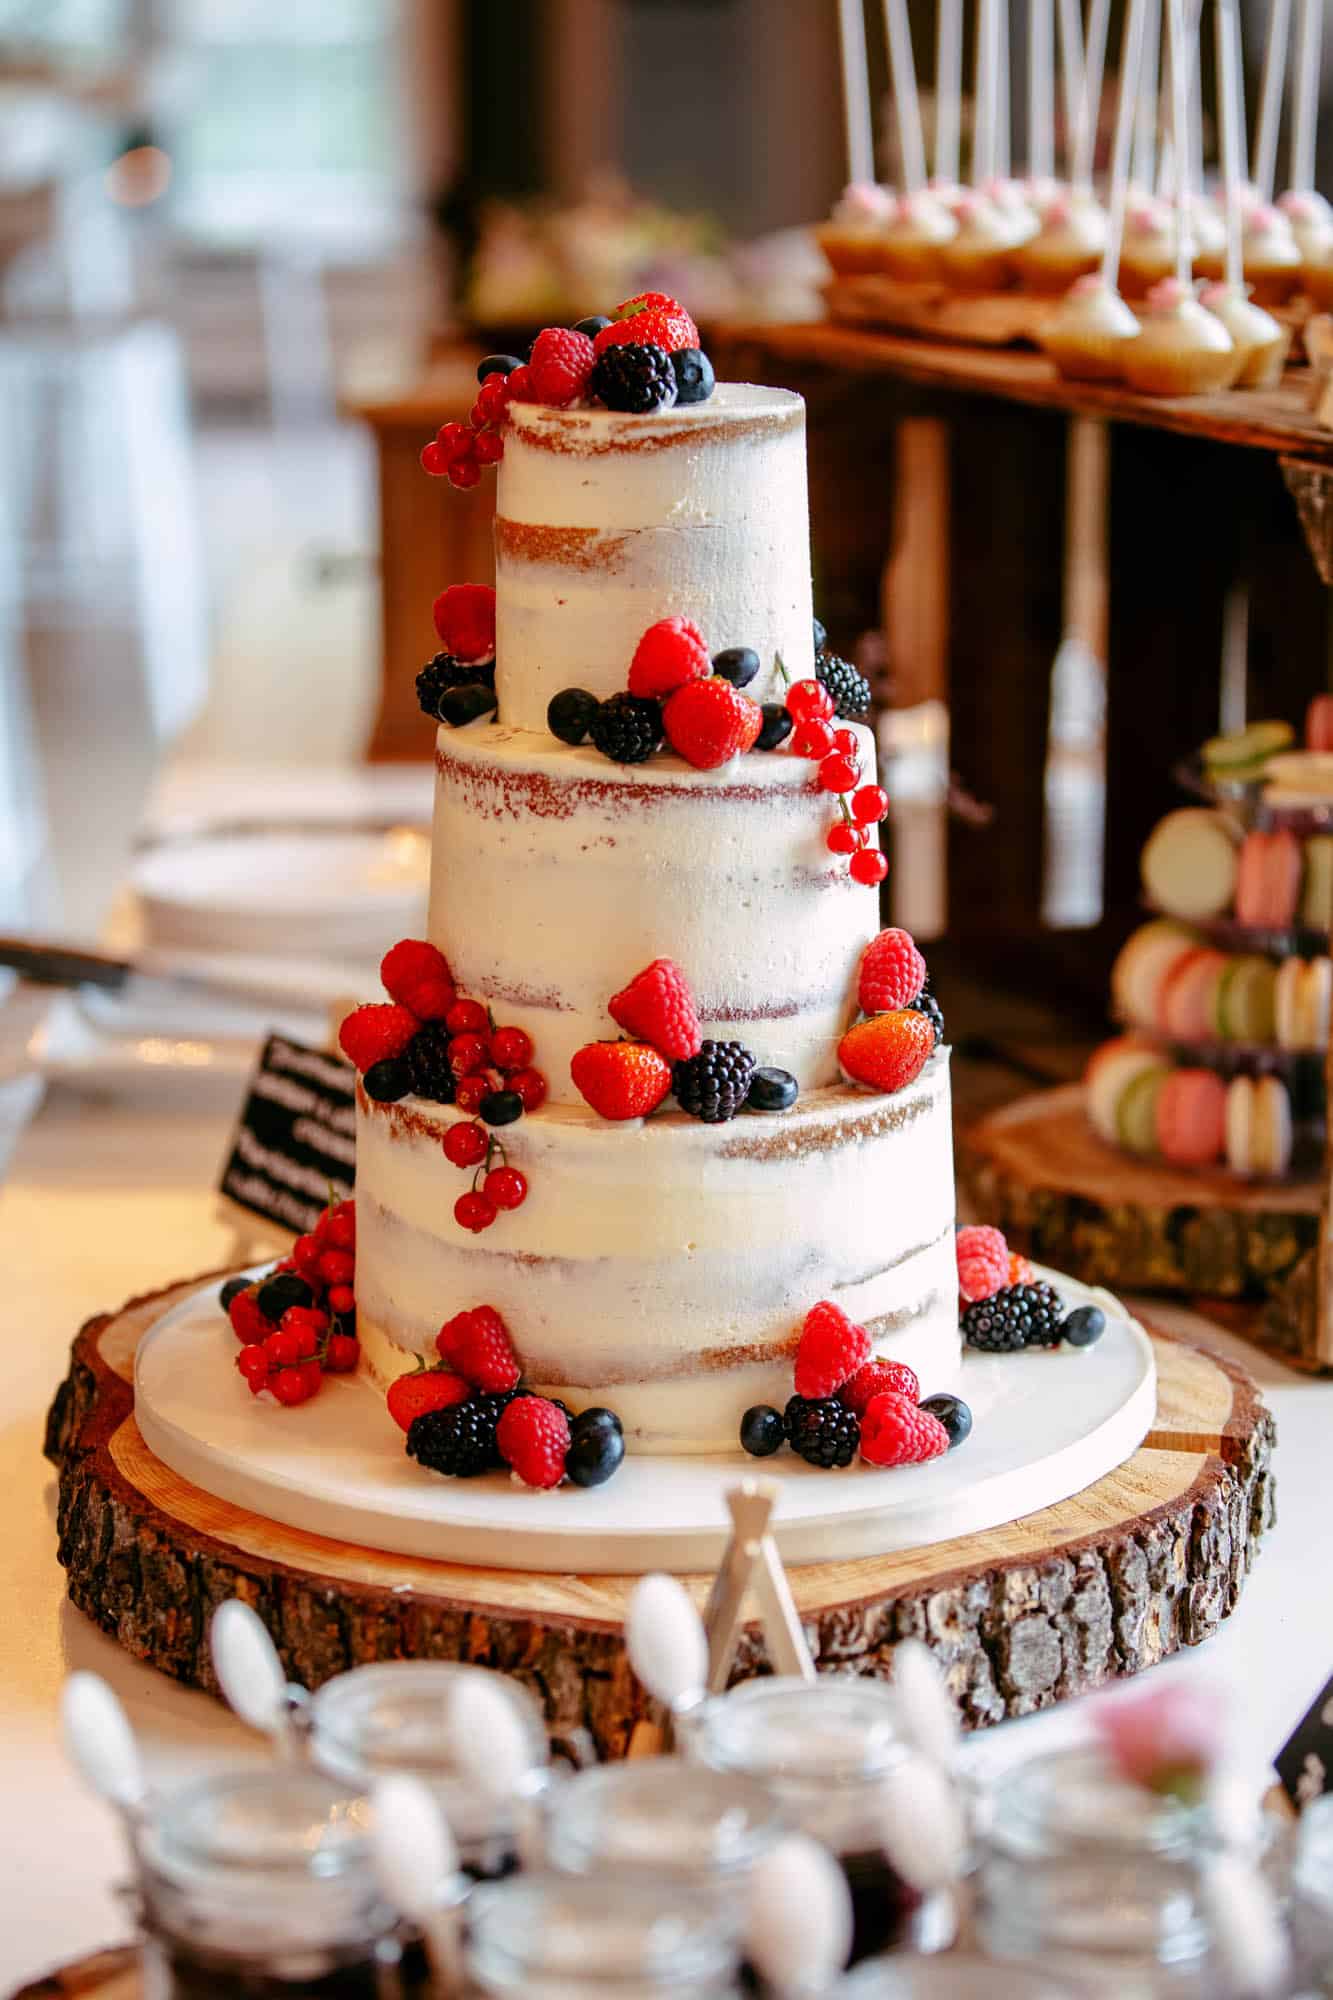 A three-layer wedding cake with berries on top.